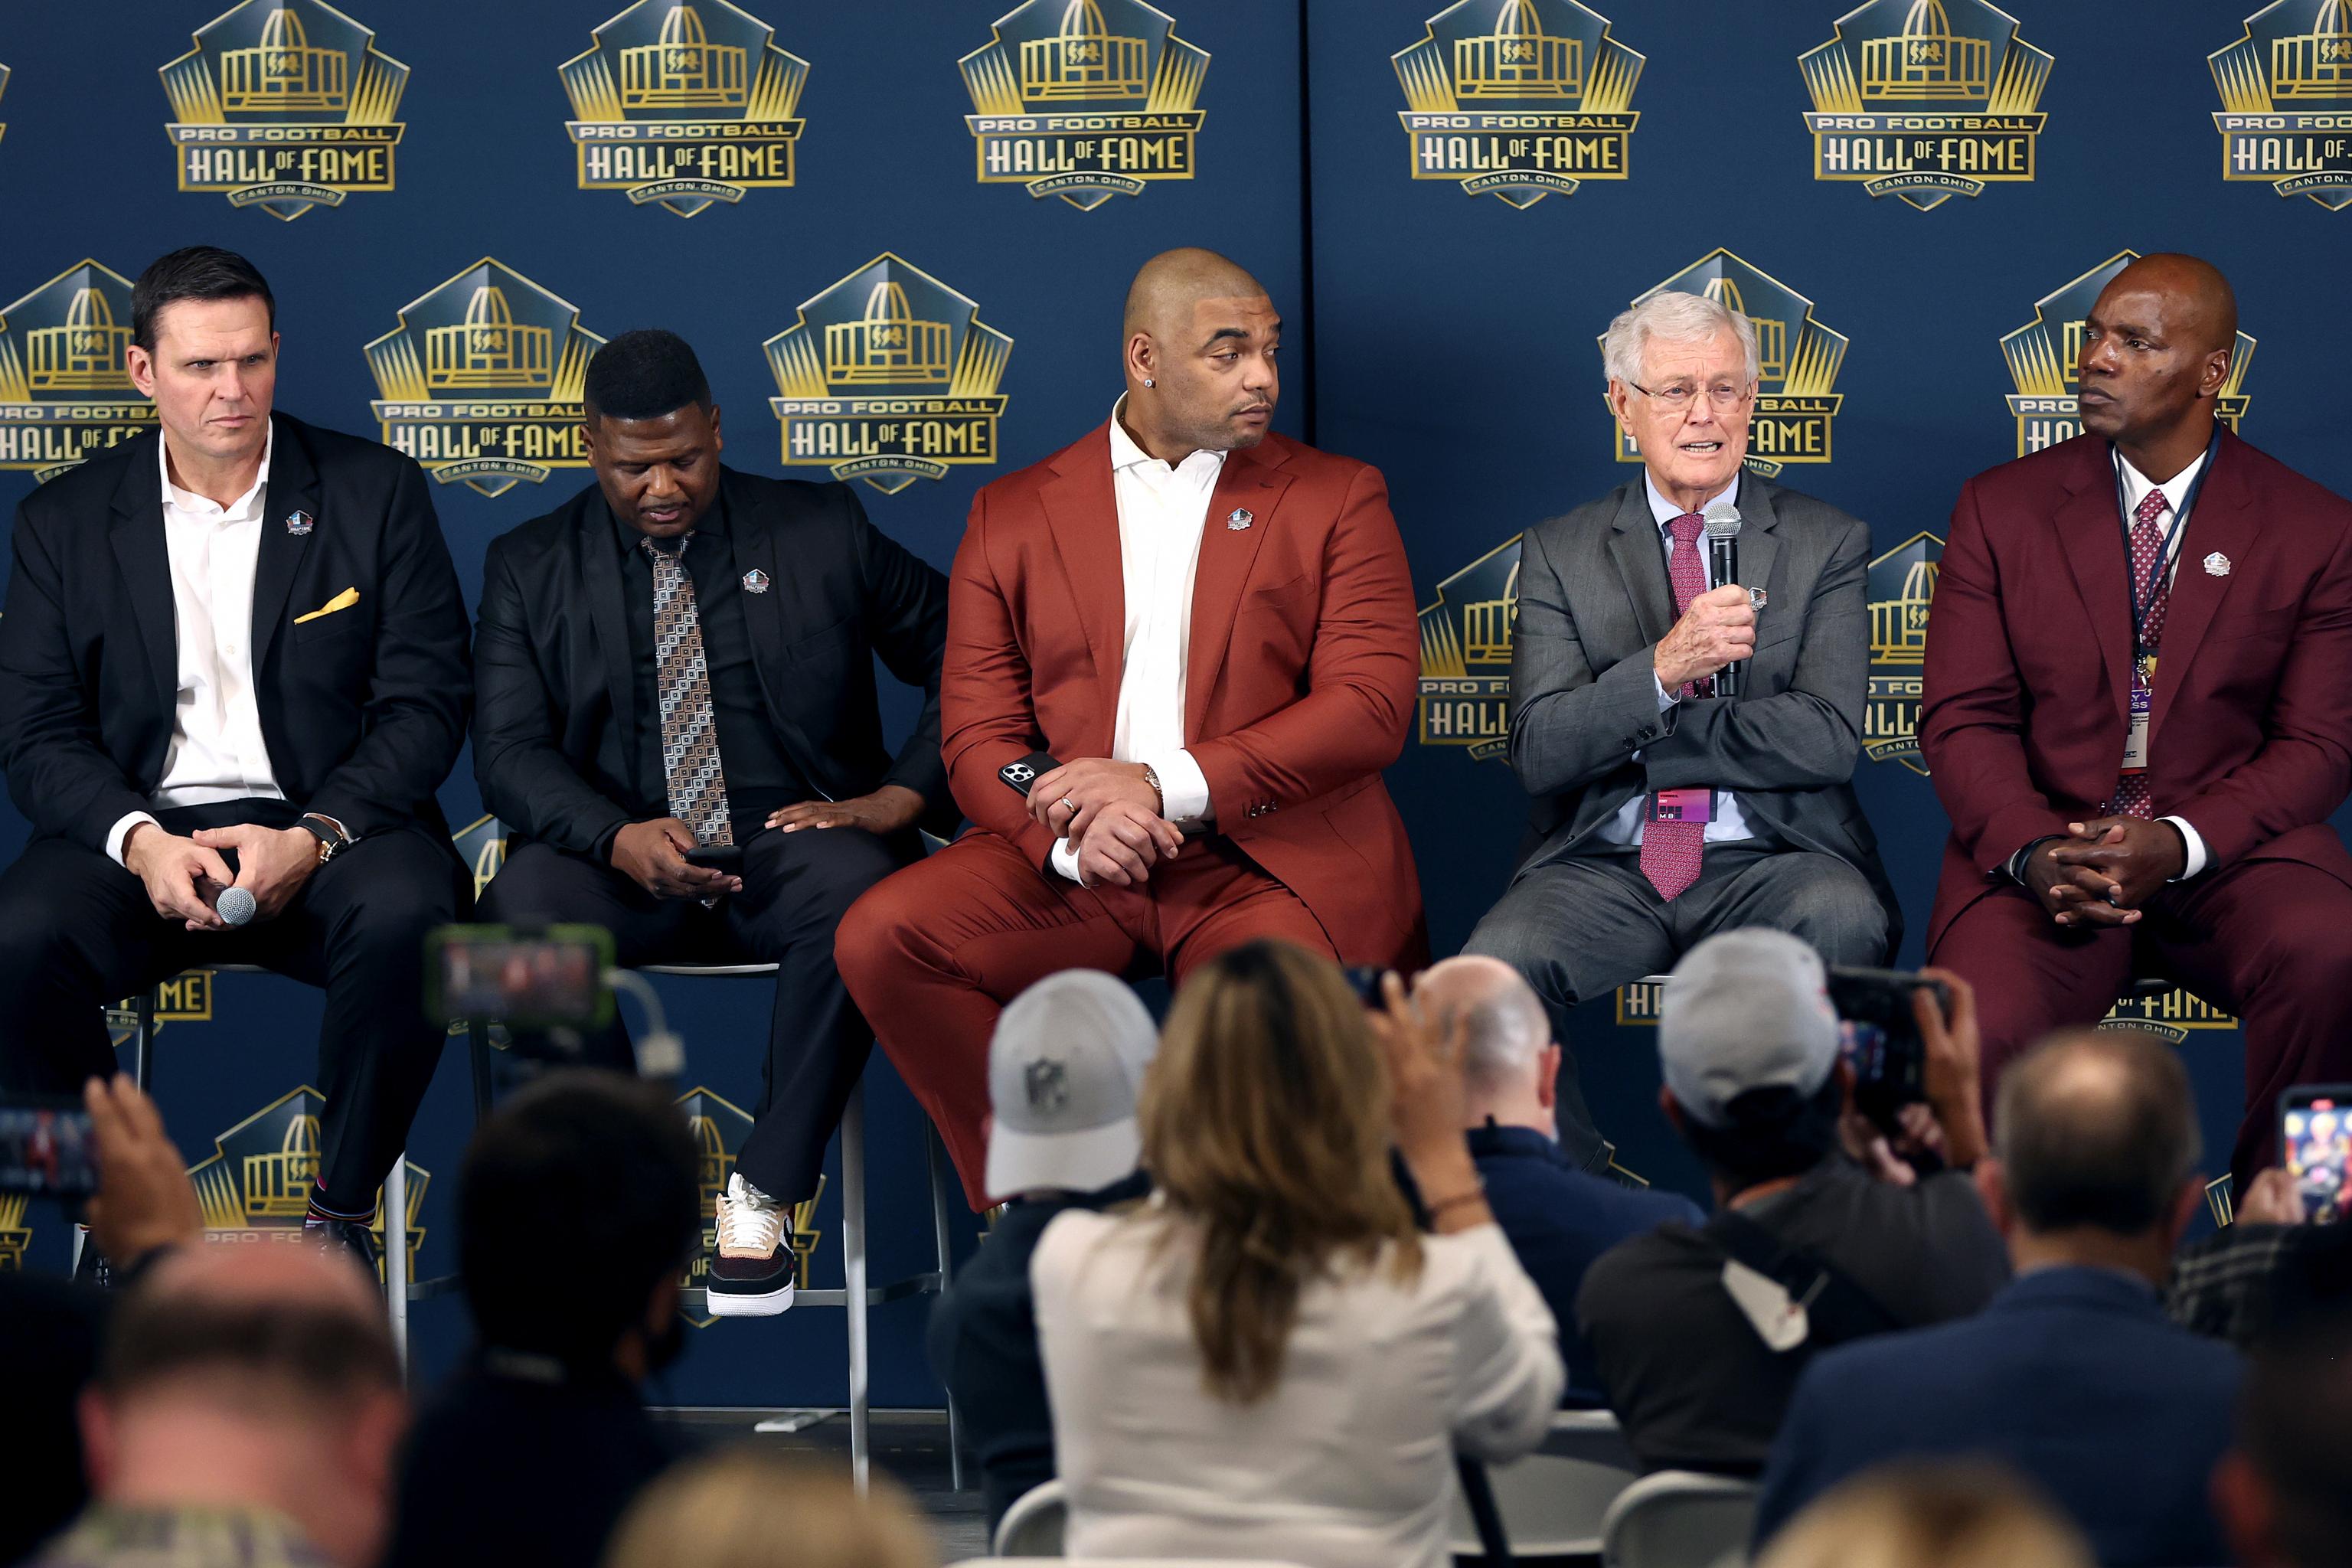 Pro Football Hall of Fame 2022: Inductees, Highlights and Reaction